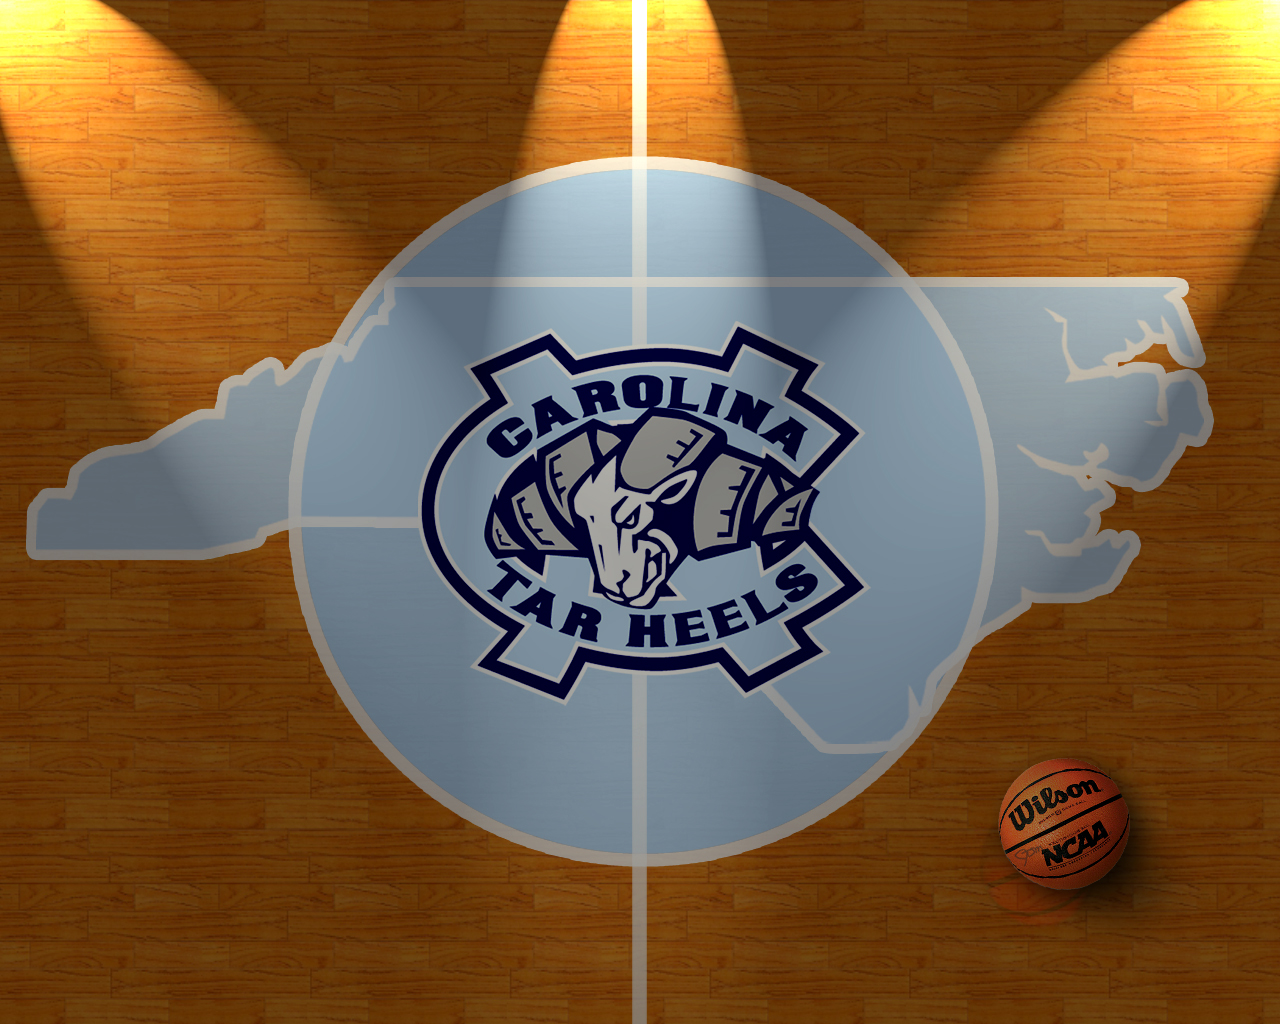 What To Expect From The North Carolina Tarheels